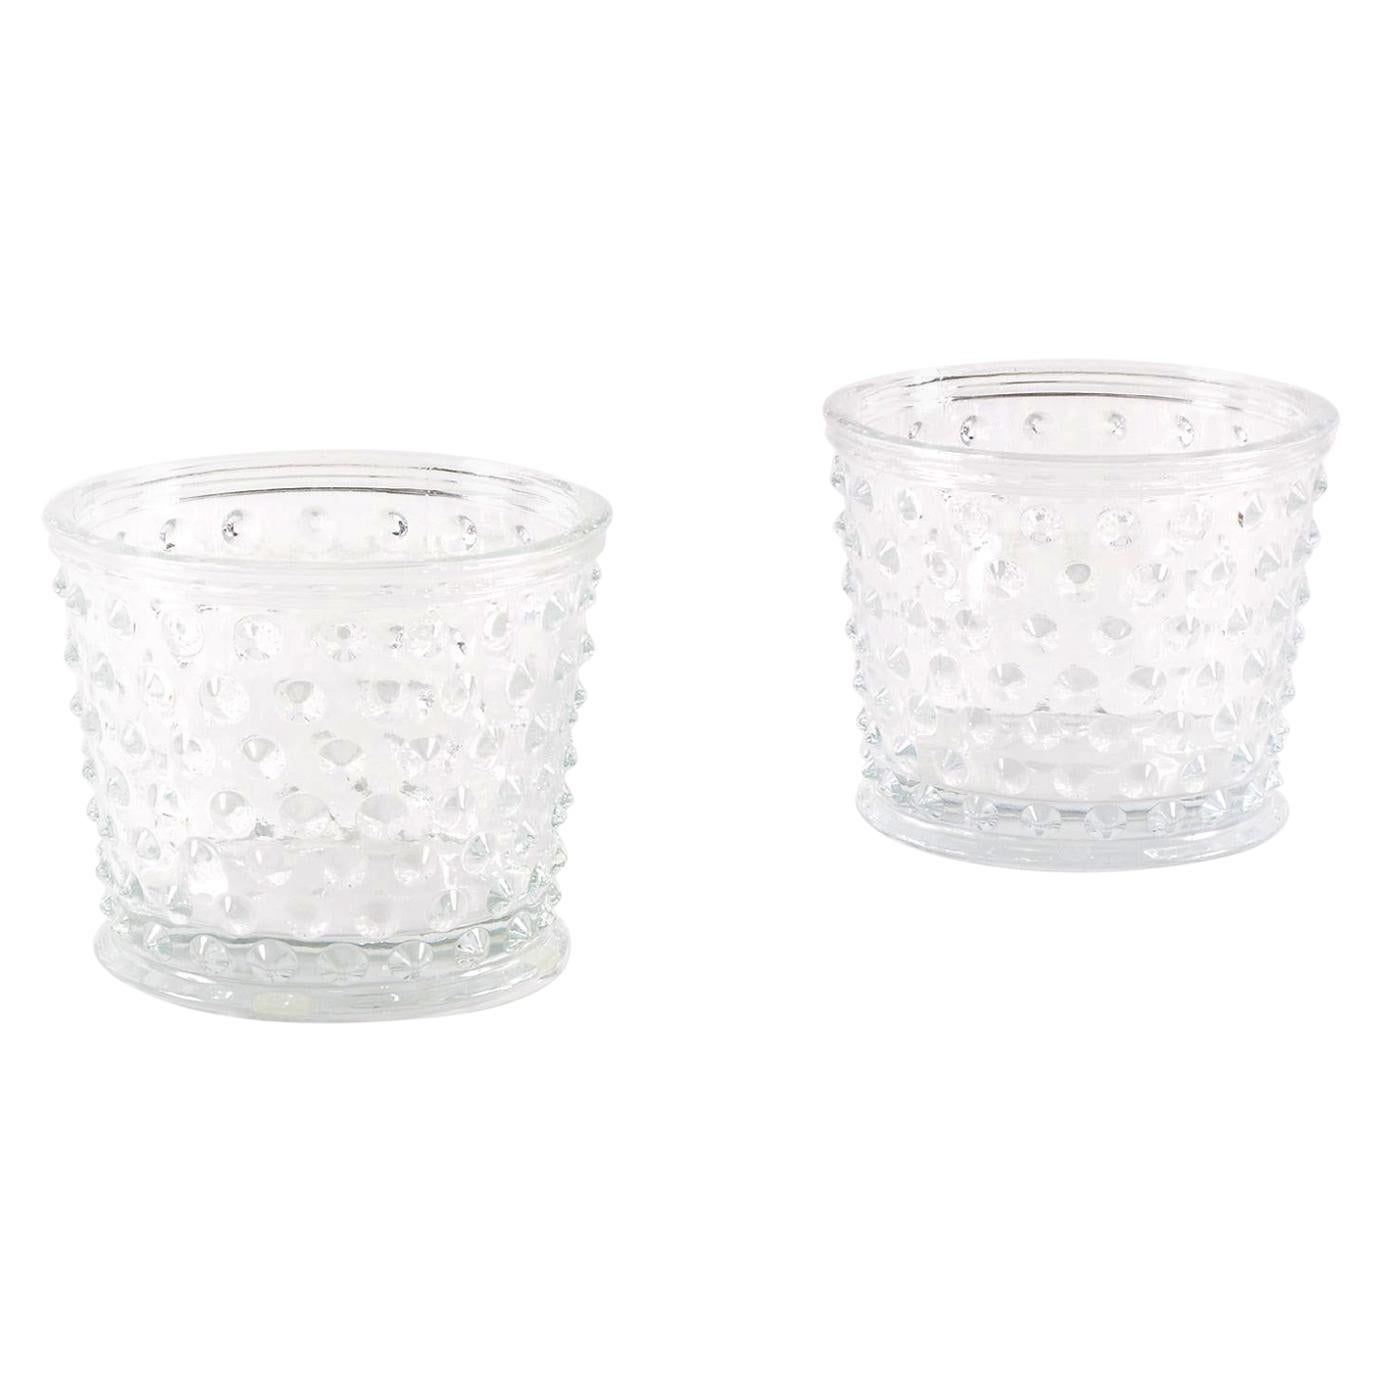 Pair of "Hortus" Glass Pots or Vases by Josef Frank For Sale